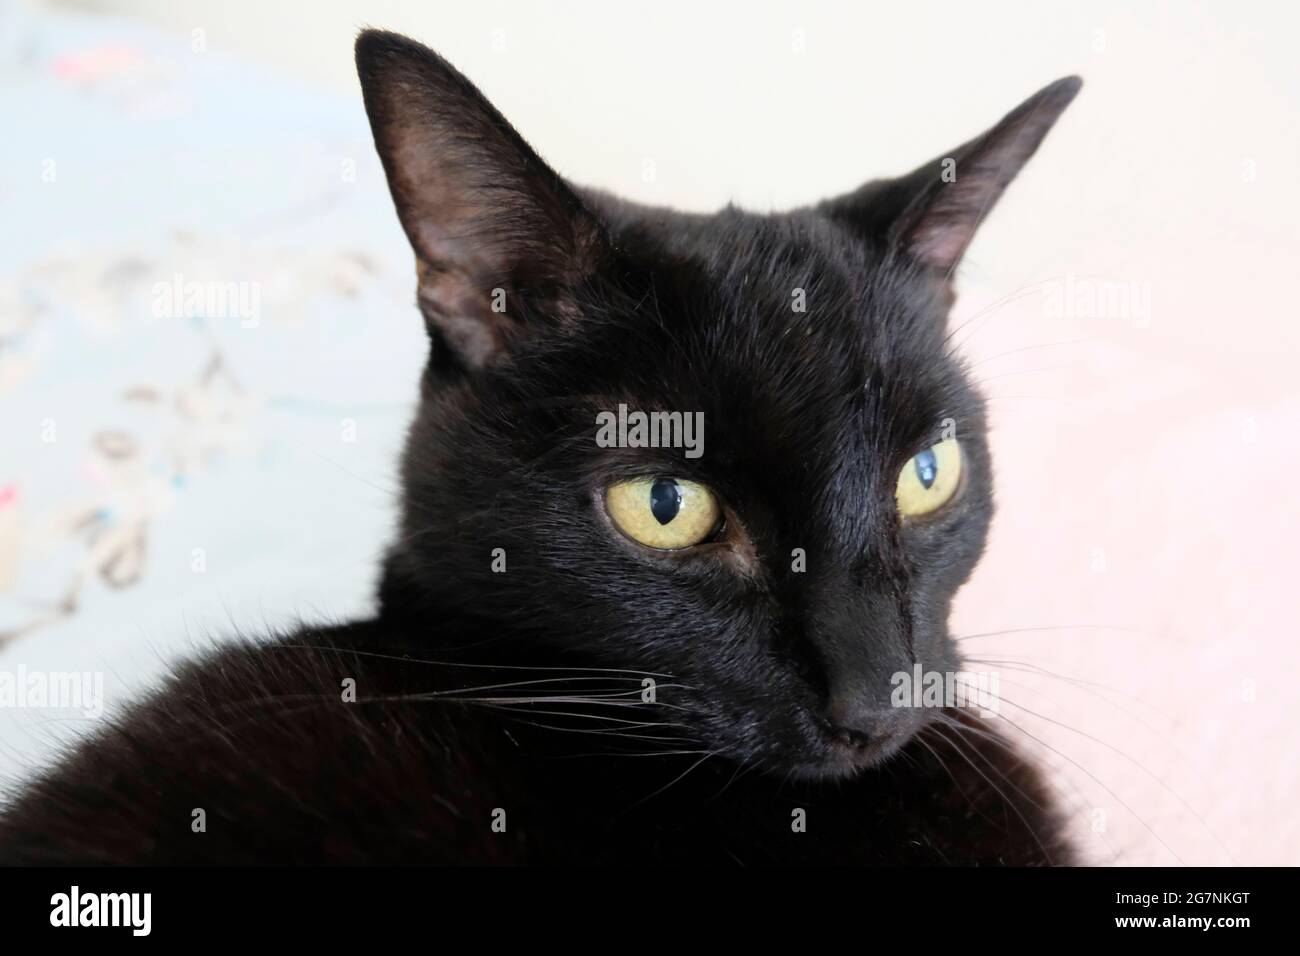 Single adult black cat (Felis catus) with weird facial expression Stock Photo